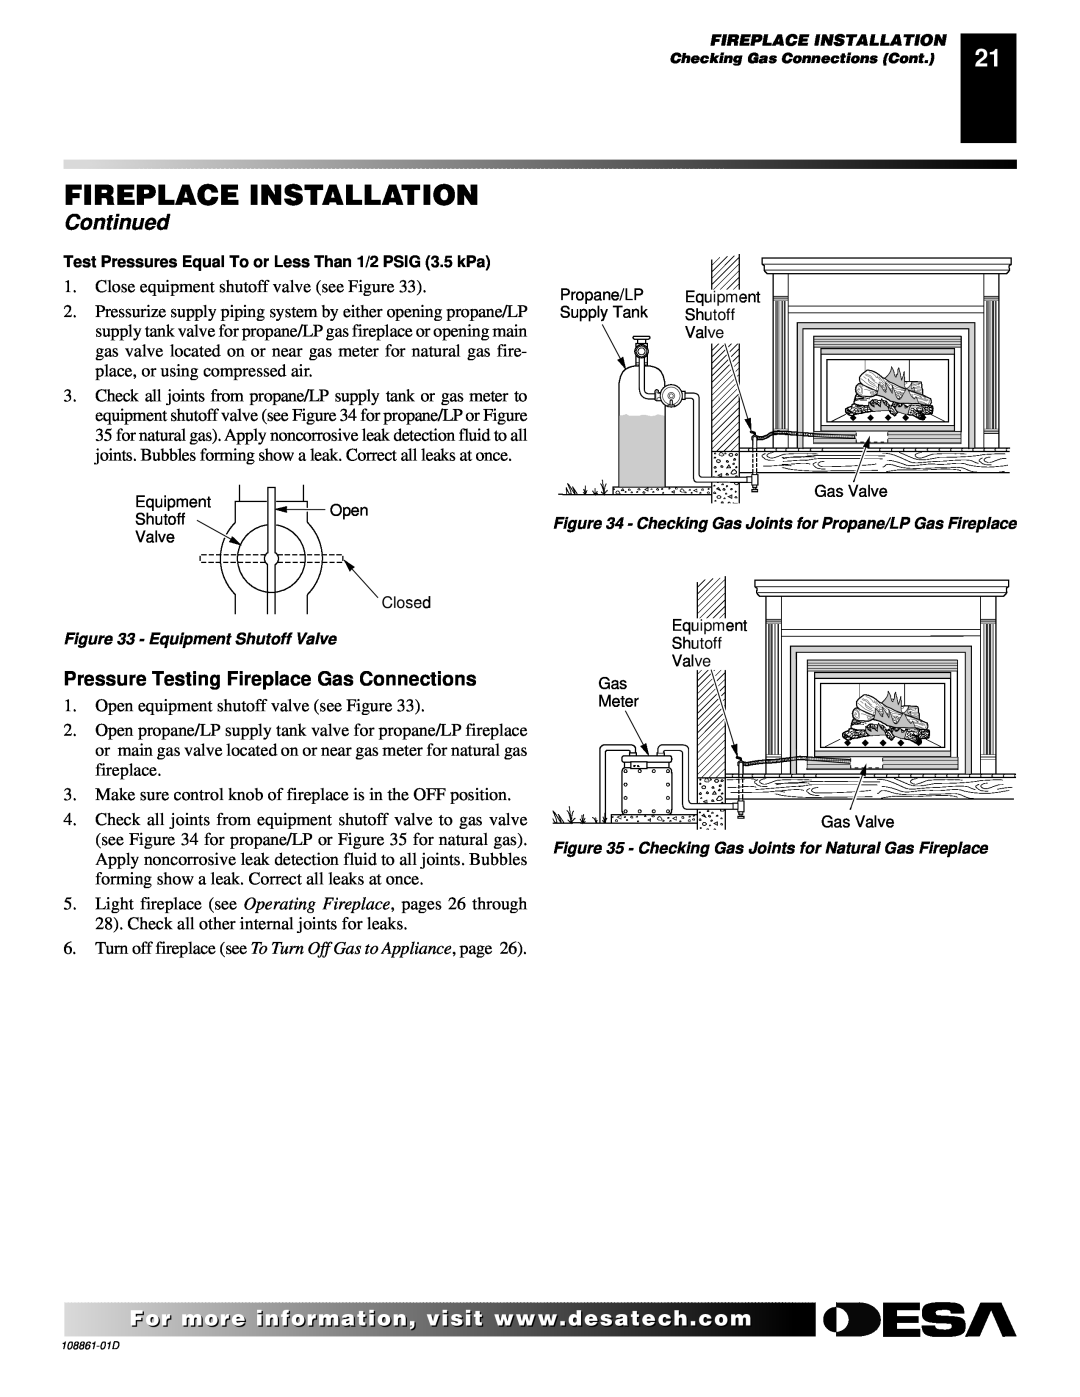 Desa (V)V42N, (V)V42P, (V)V36P, CHDV36NR Pressure Testing Fireplace Gas Connections, Fireplace Installation, Continued 